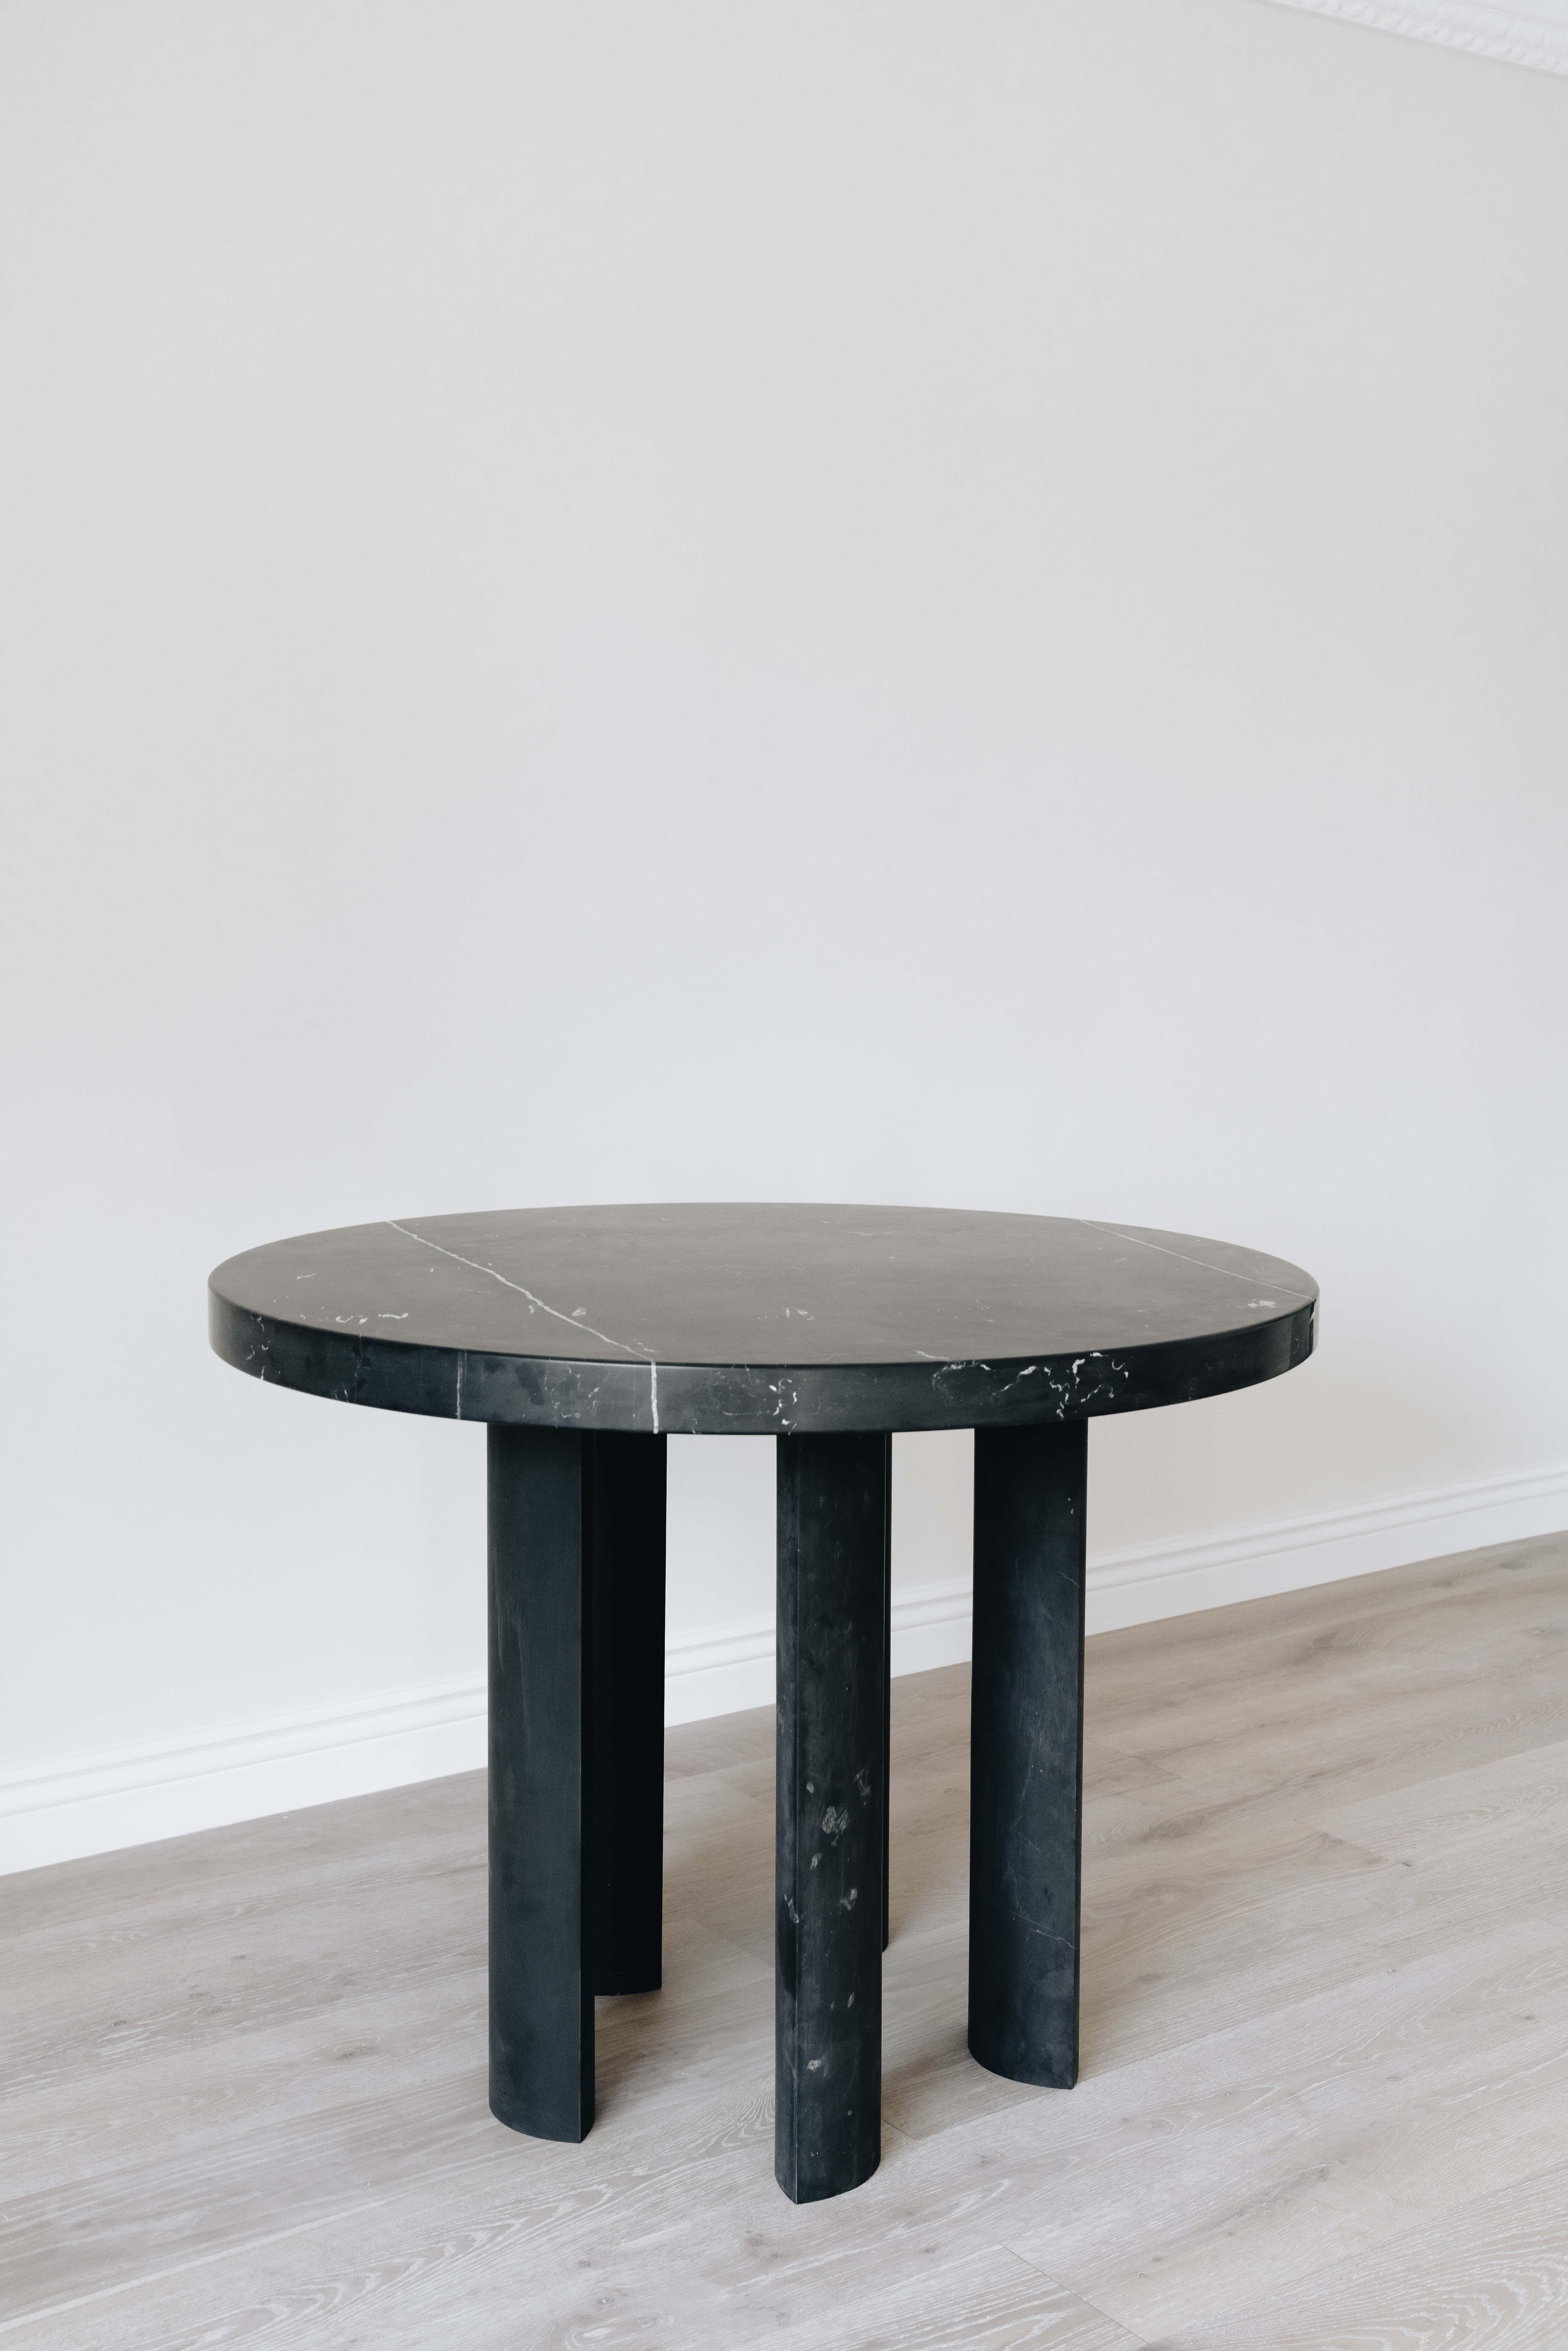 Sculptoric solid black Monterrey marble table, handmade in Mexico City. This table consists of 5 solid marble legs and one 110 cm diameter tabletop which are sent sepparately to be assembled on site.

Tribute to Adamo Boari, Italian-Mexican